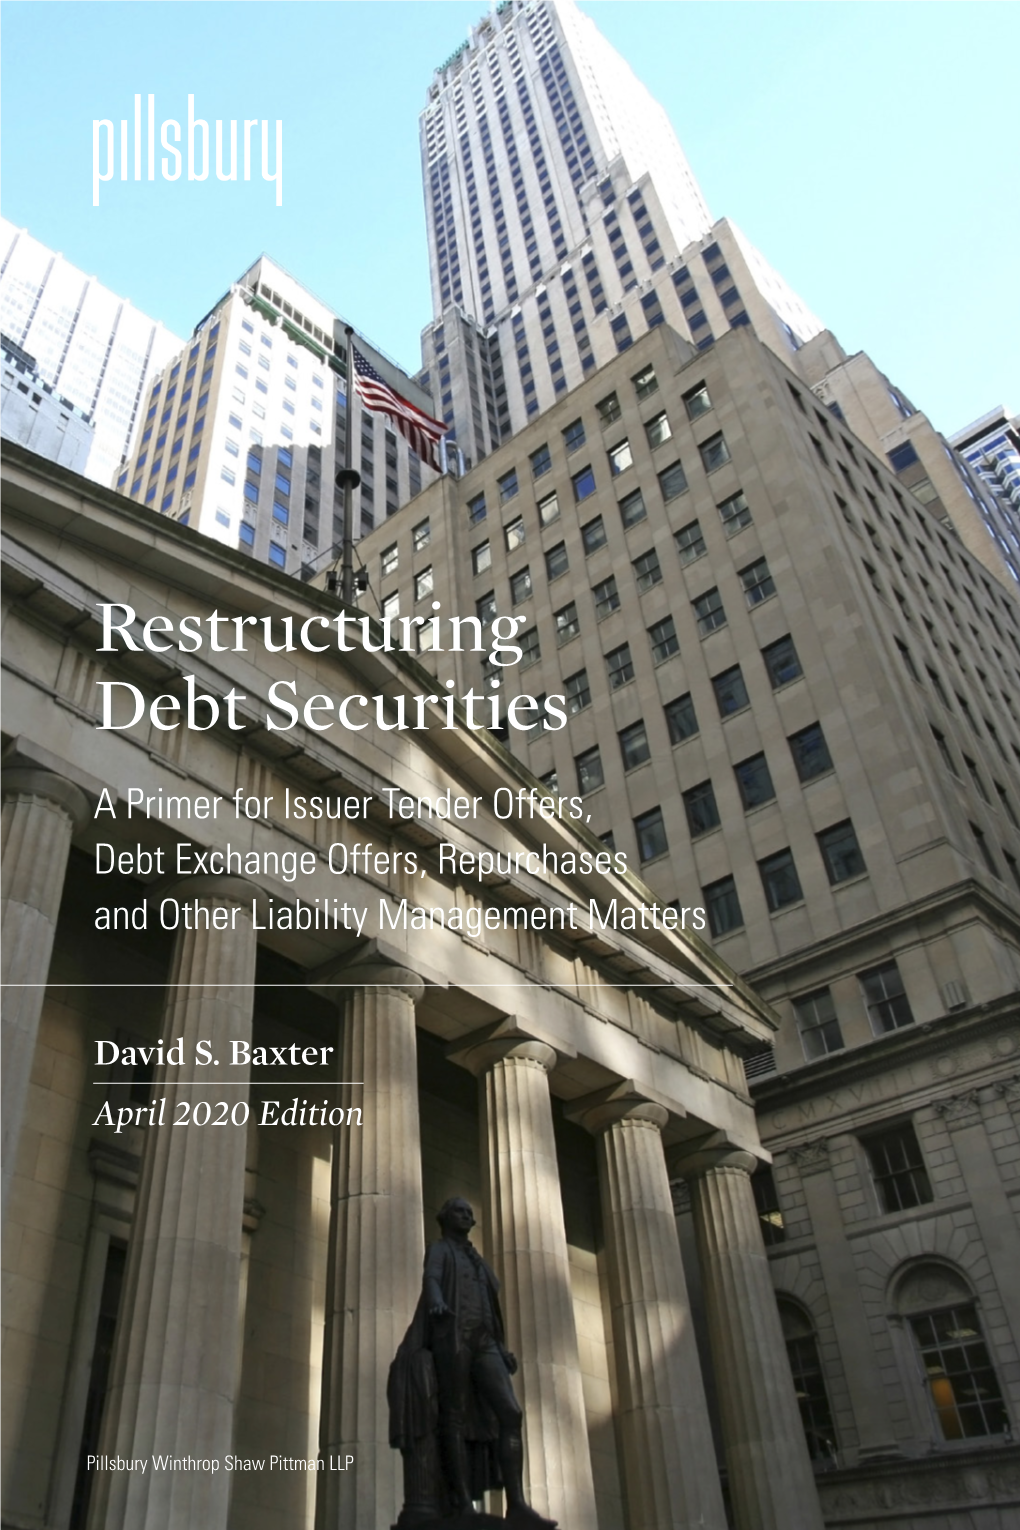 Restructuring Debt Securities a Primer for Issuer Tender Offers, Debt Exchange Offers, Repurchases and Other Liability Management Matters